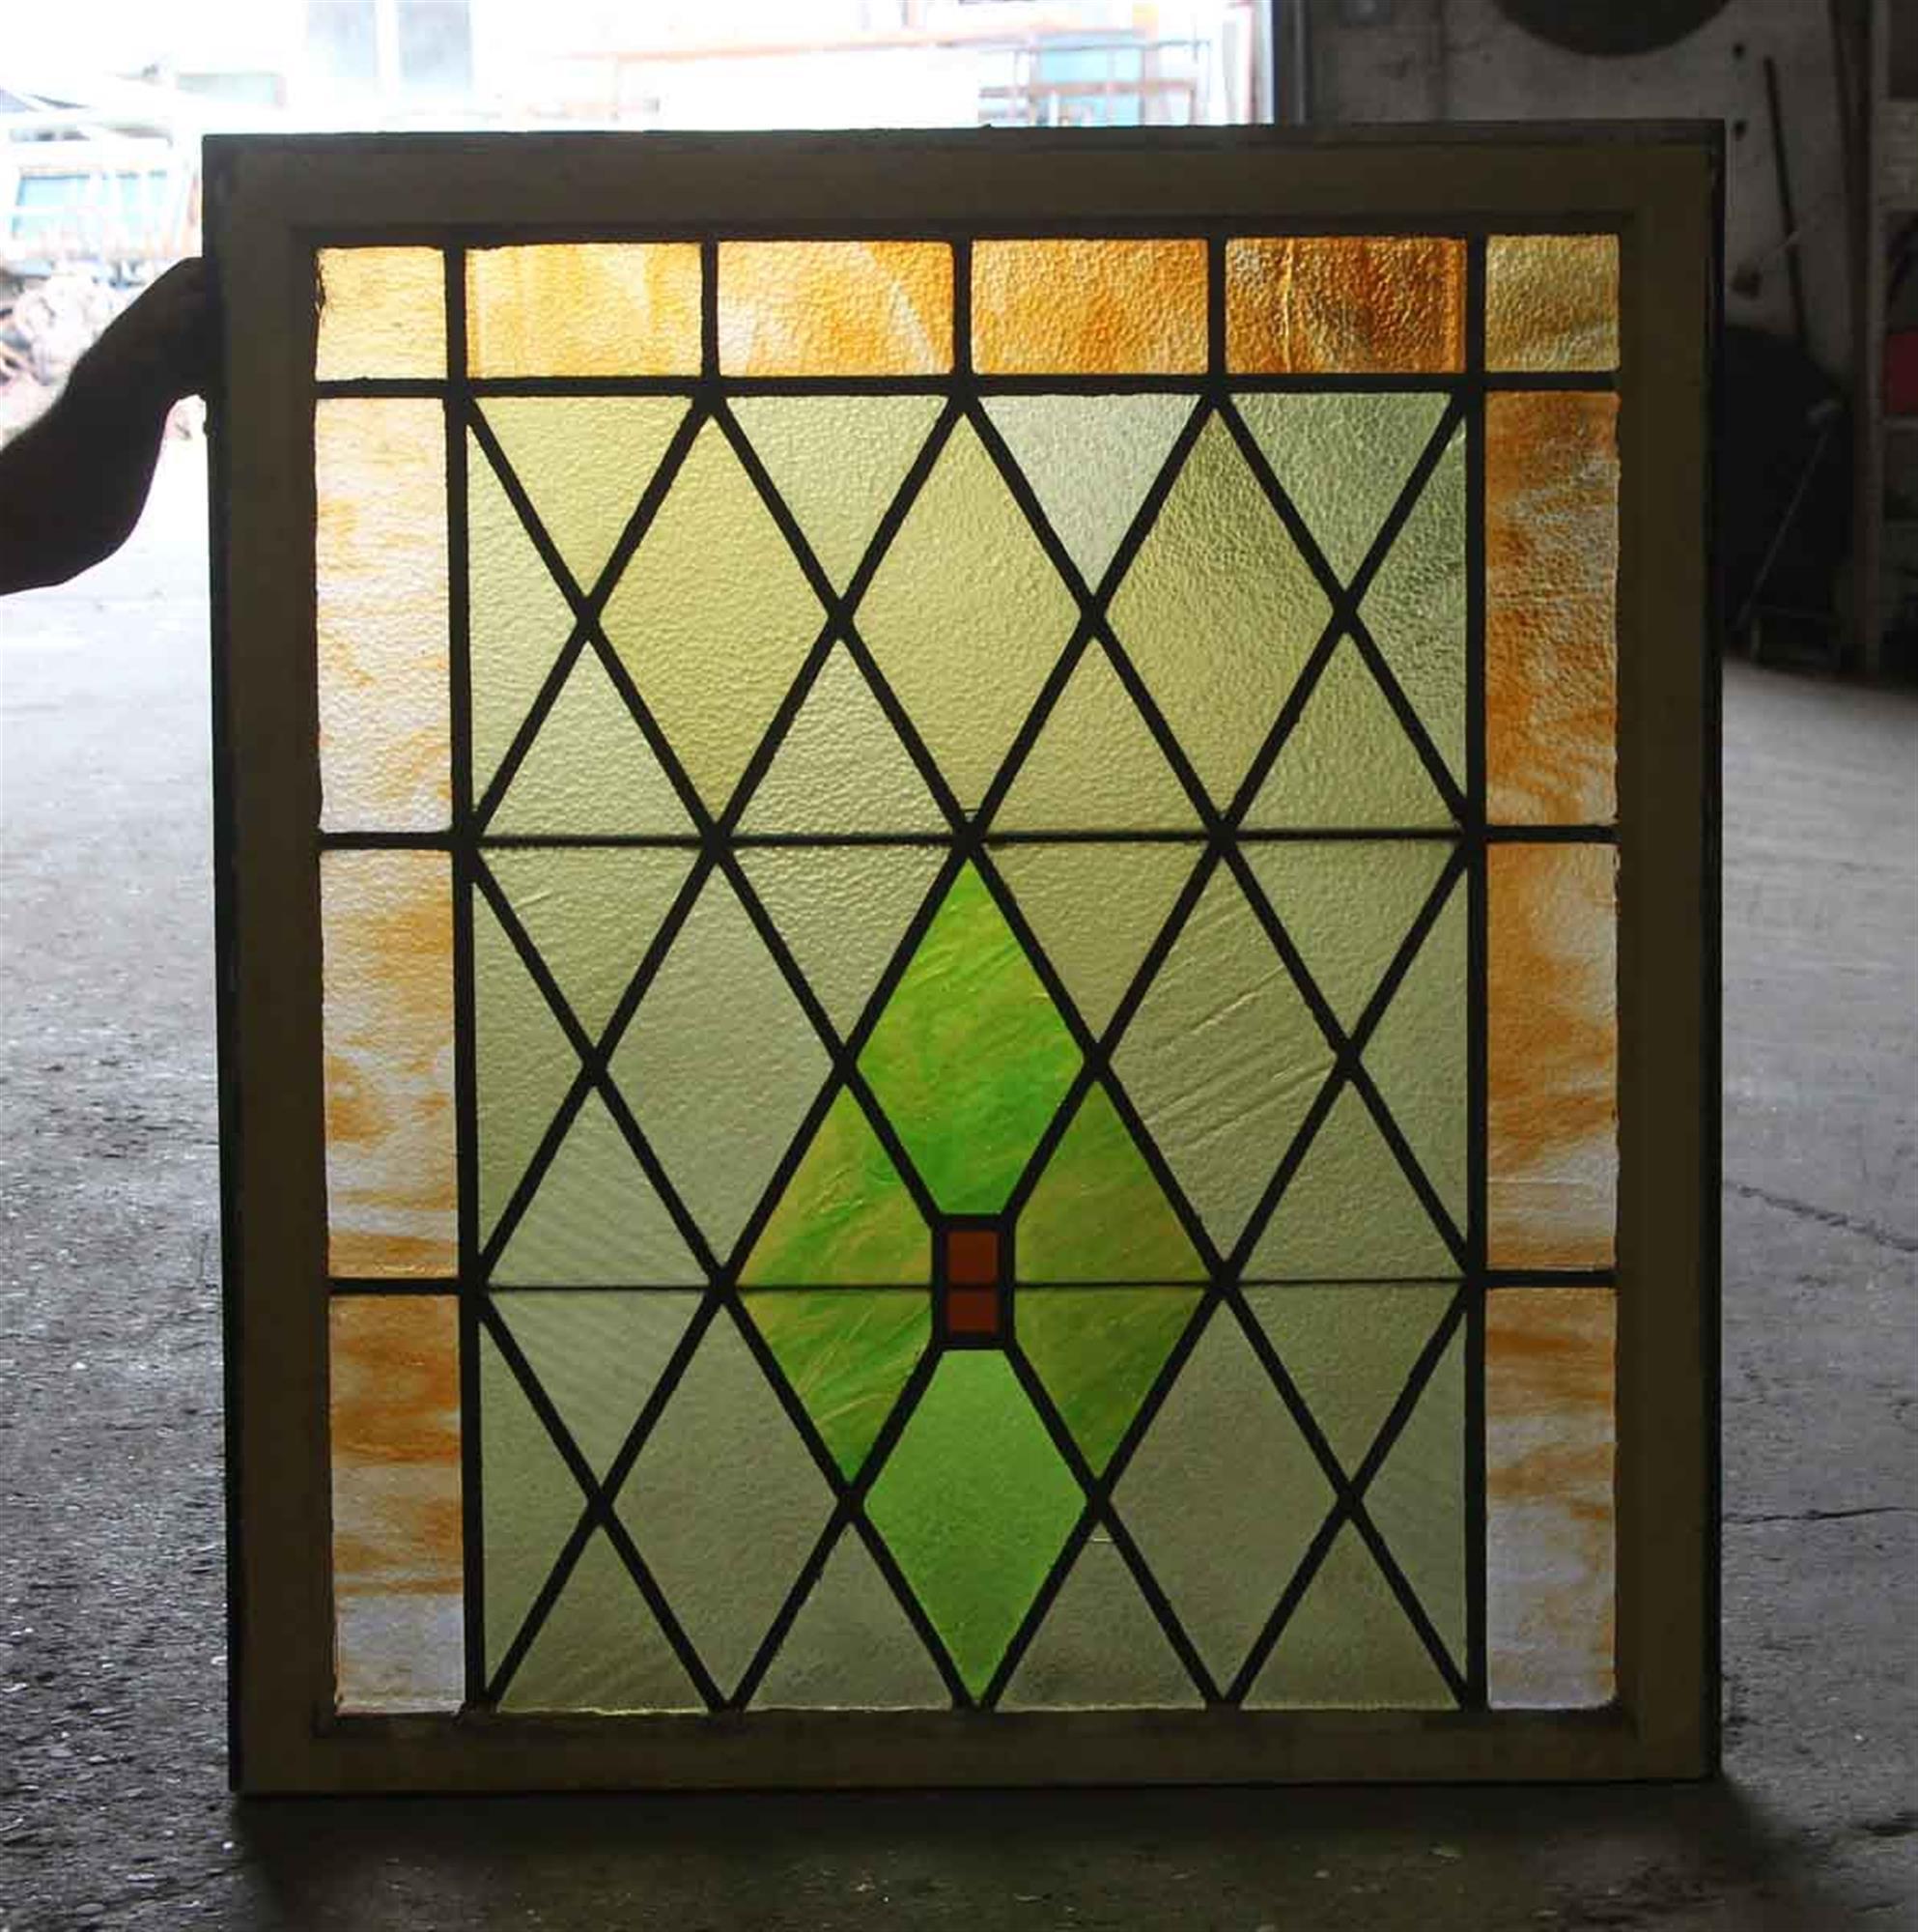 Wood frame top sash stained glass window with diamond patterns typical of the Tudor style. The glass is made up of orange and green colors in varying intensities. The frame is brown on one side and beige on the other. Made circa 1915 during the Arts